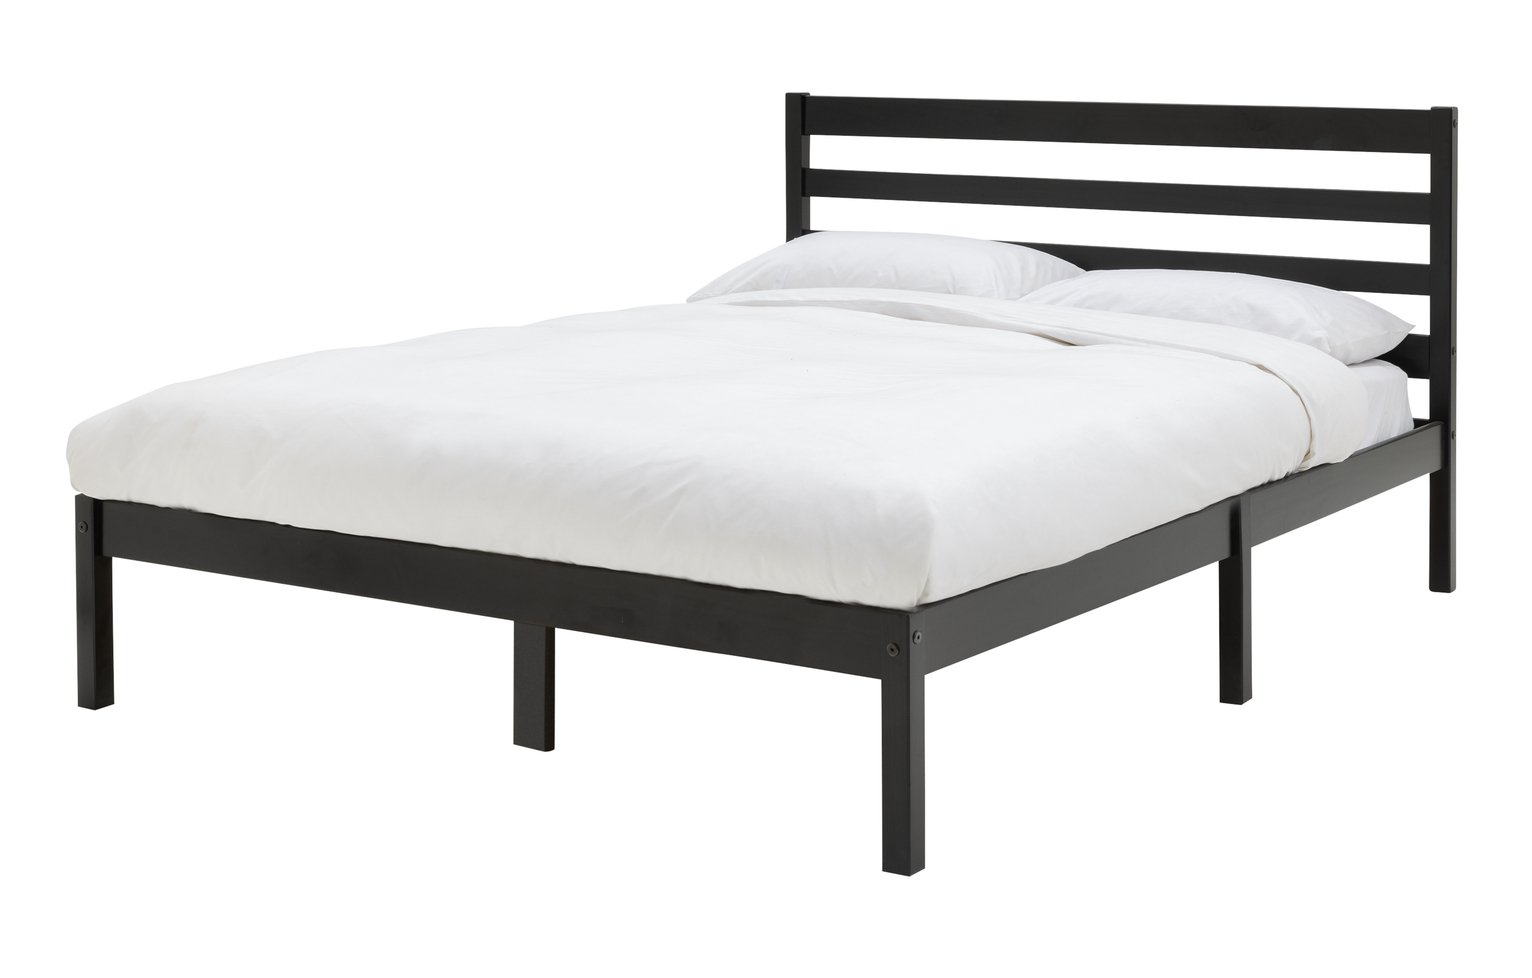 Argos Home Kaycie Small Double Wooden Bed Frame - Black